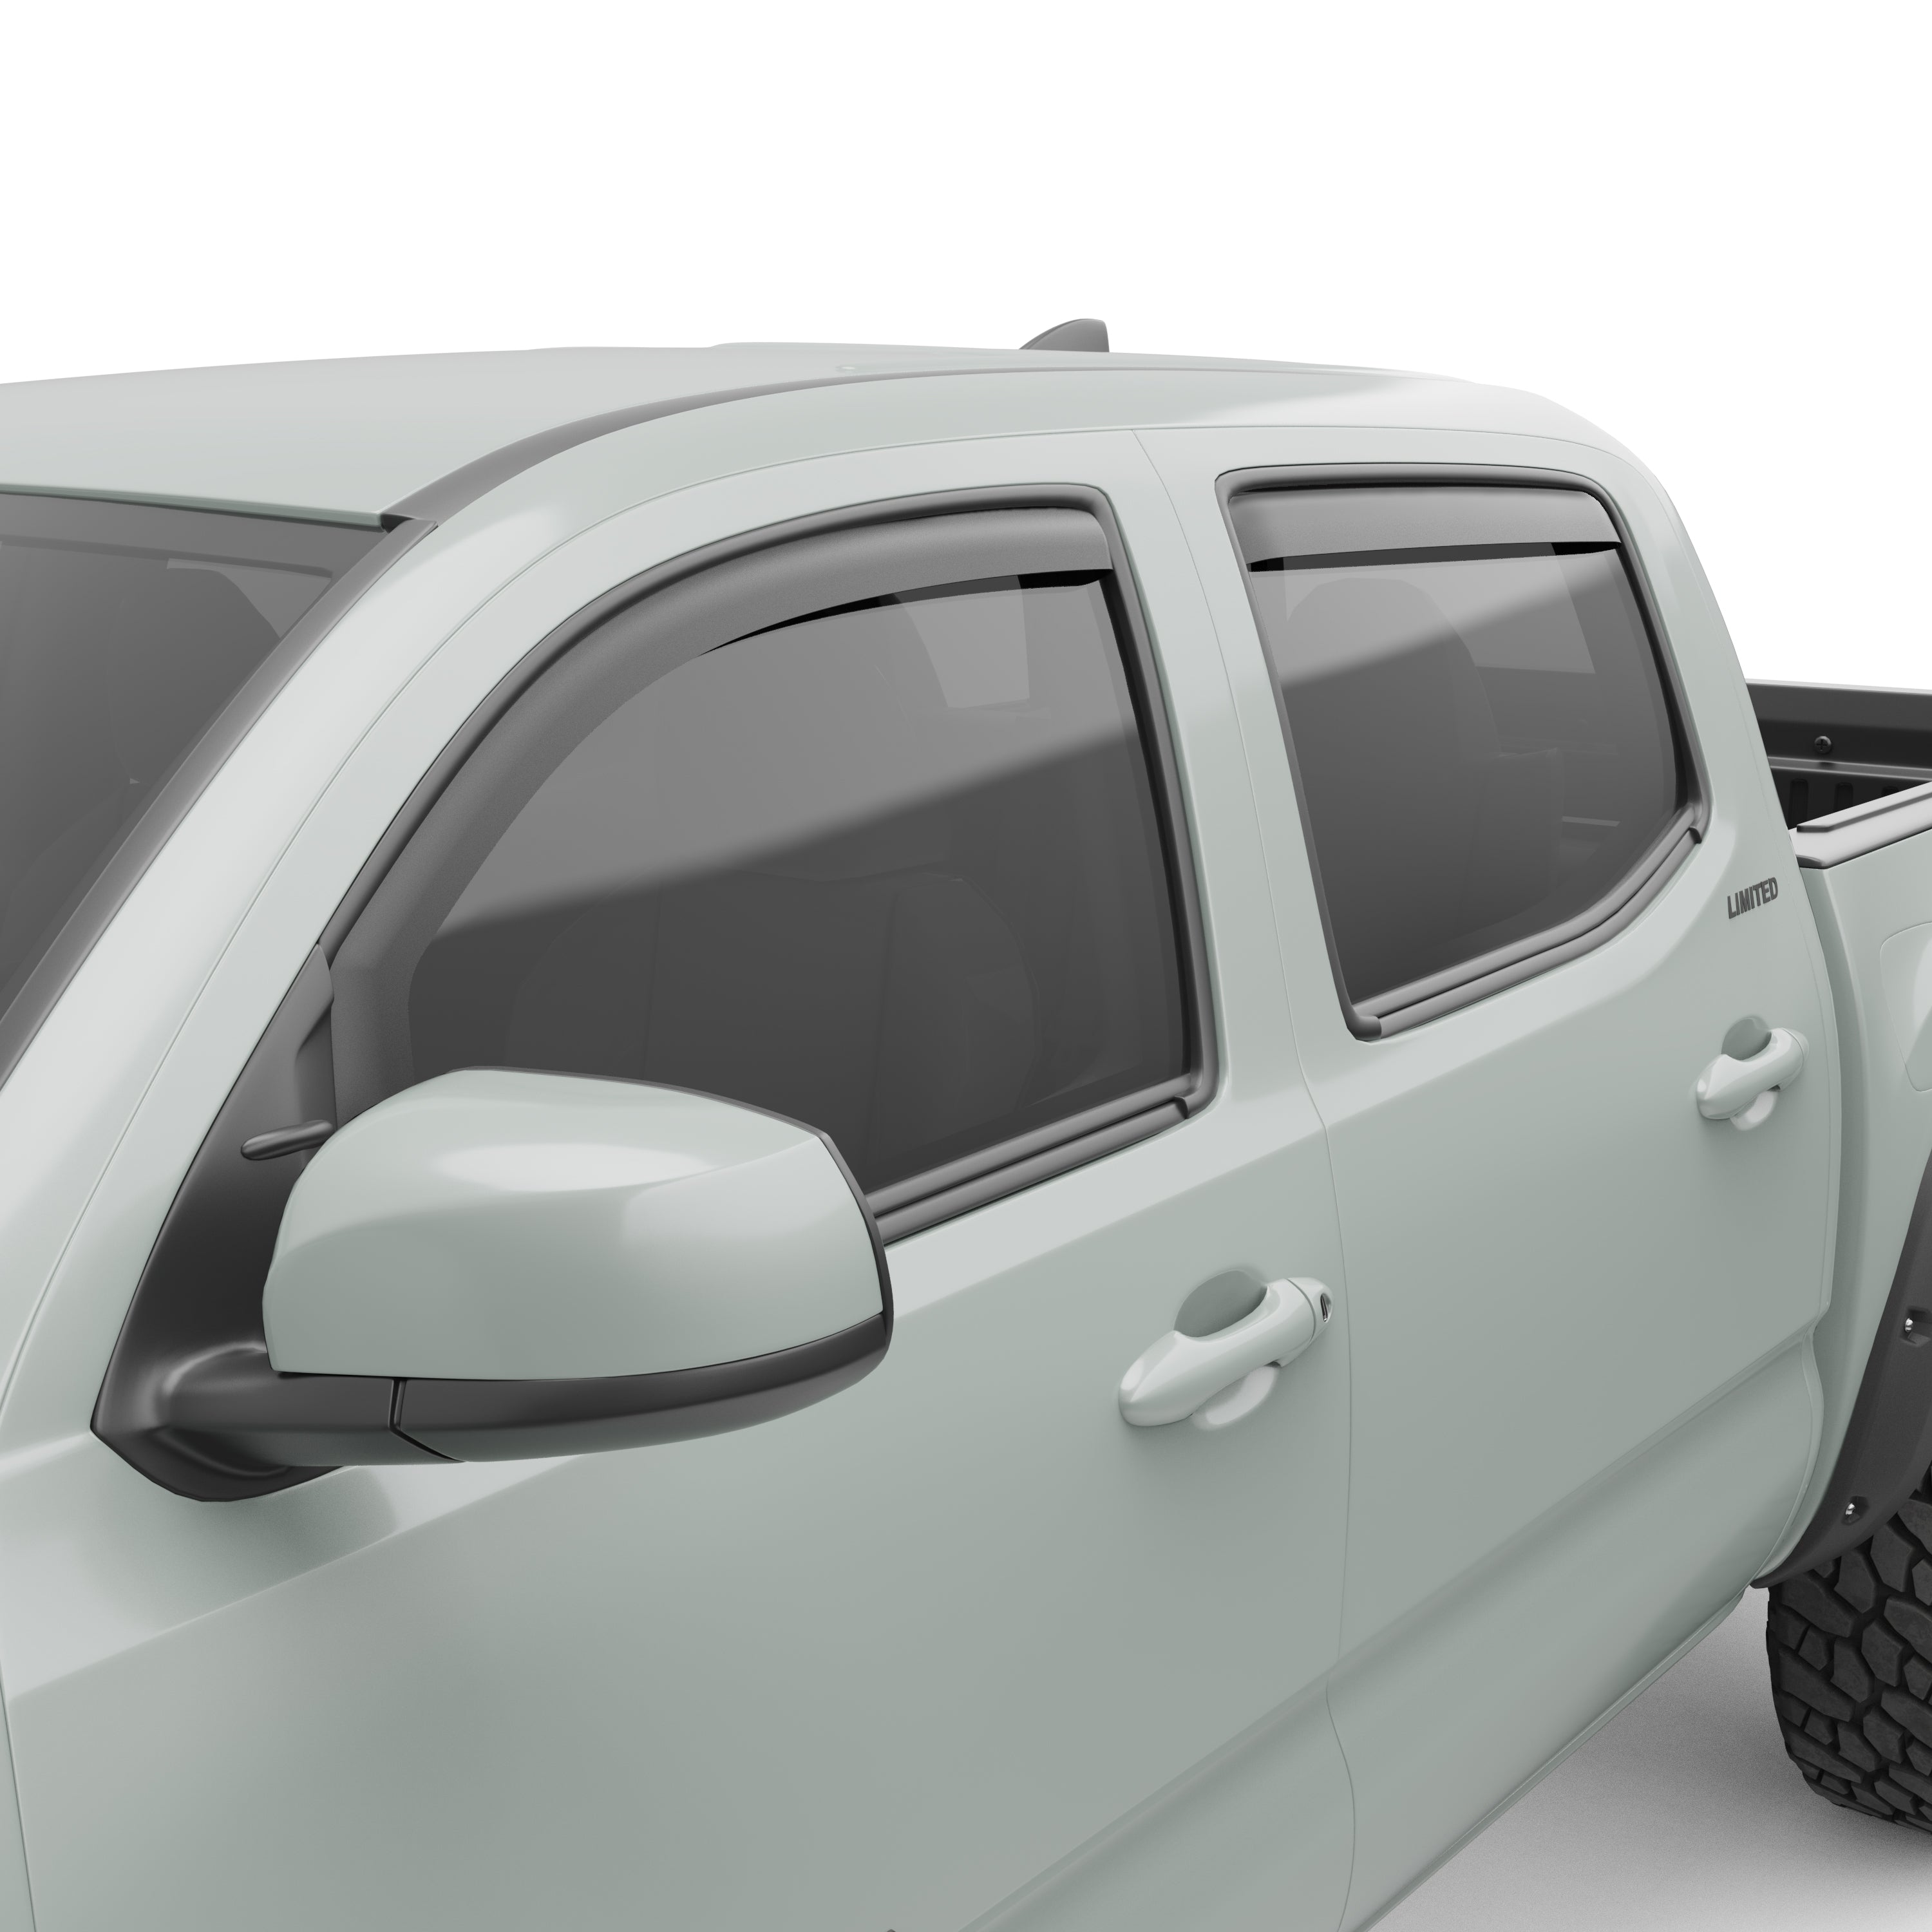 EGR in-channel window visors front & rear set matte black Crew Cab 16-22 Toyota Tacoma